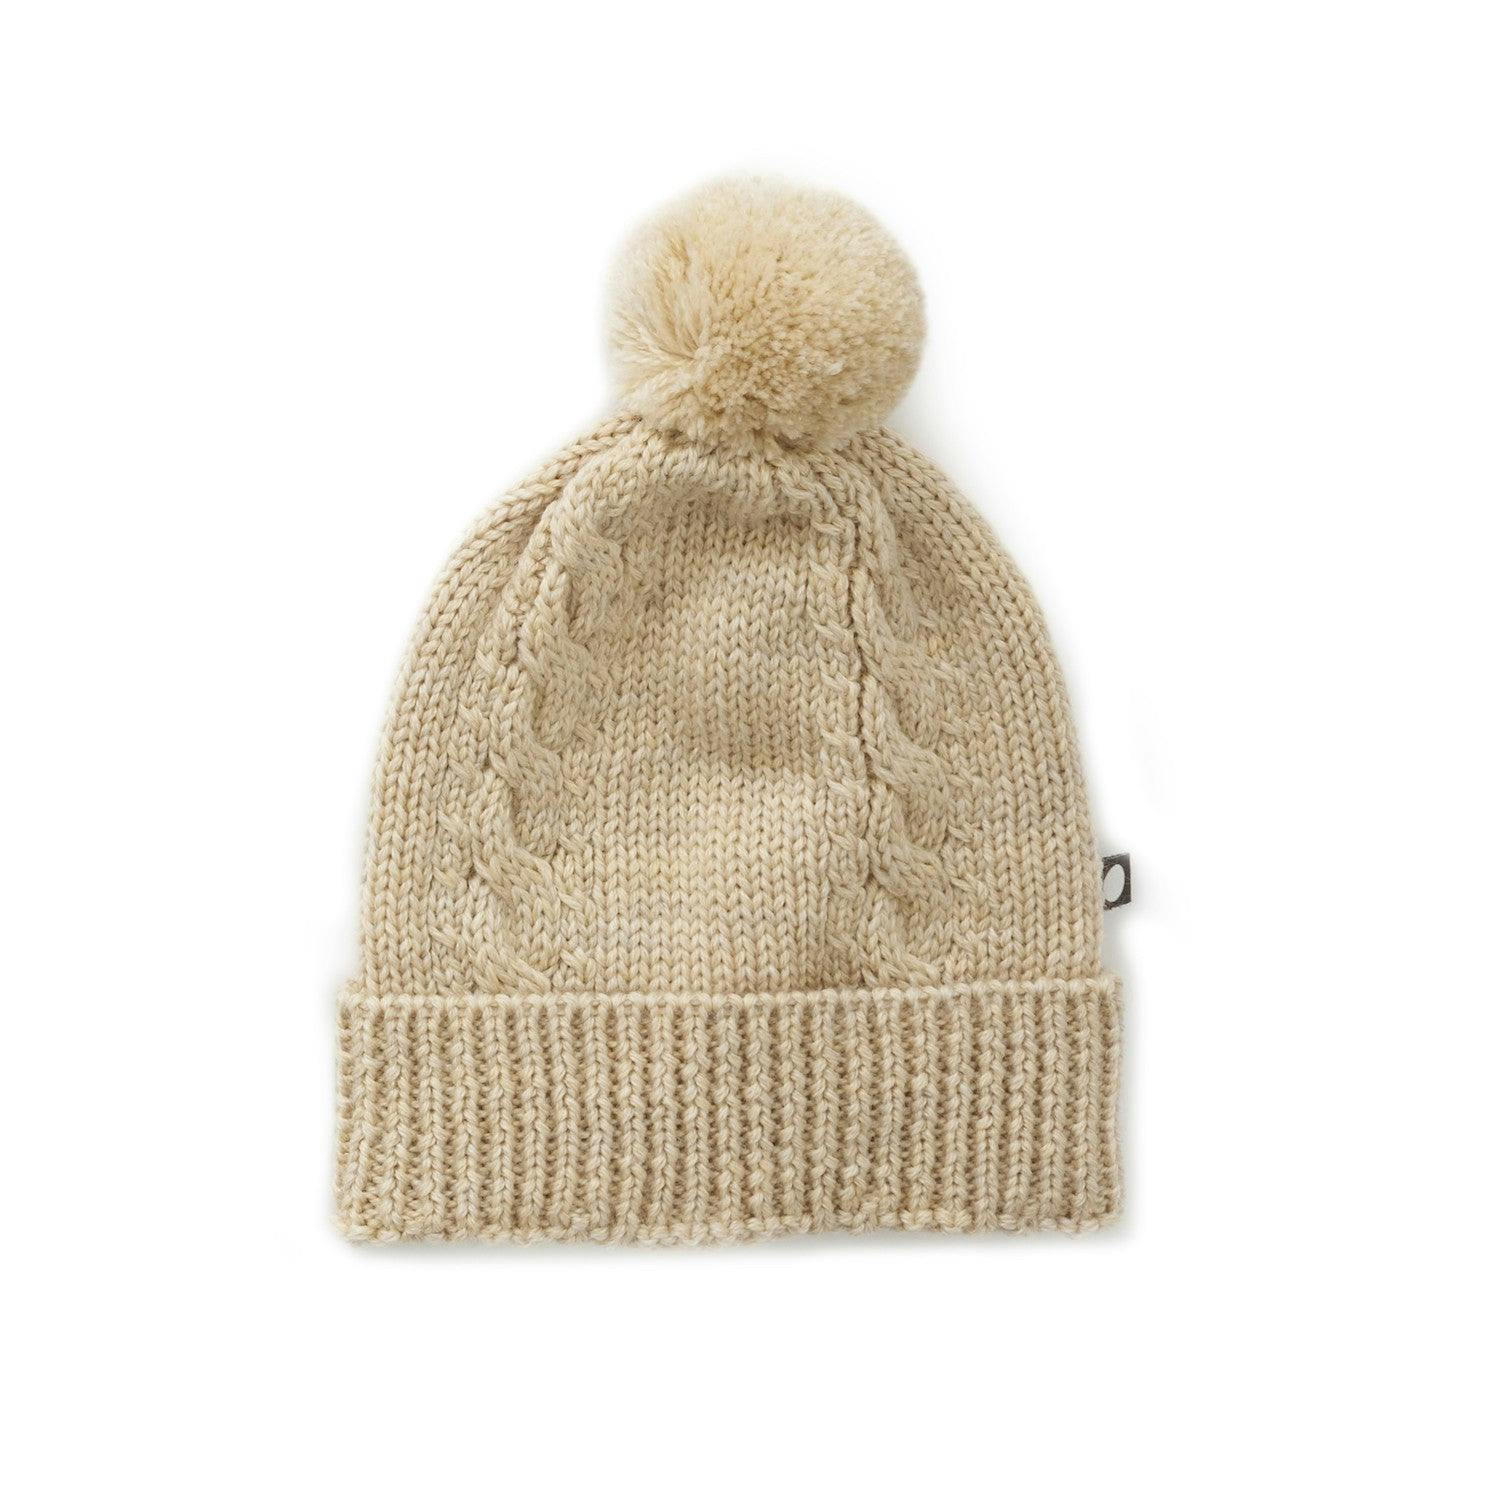 Oeuf Cable Knit Beanie